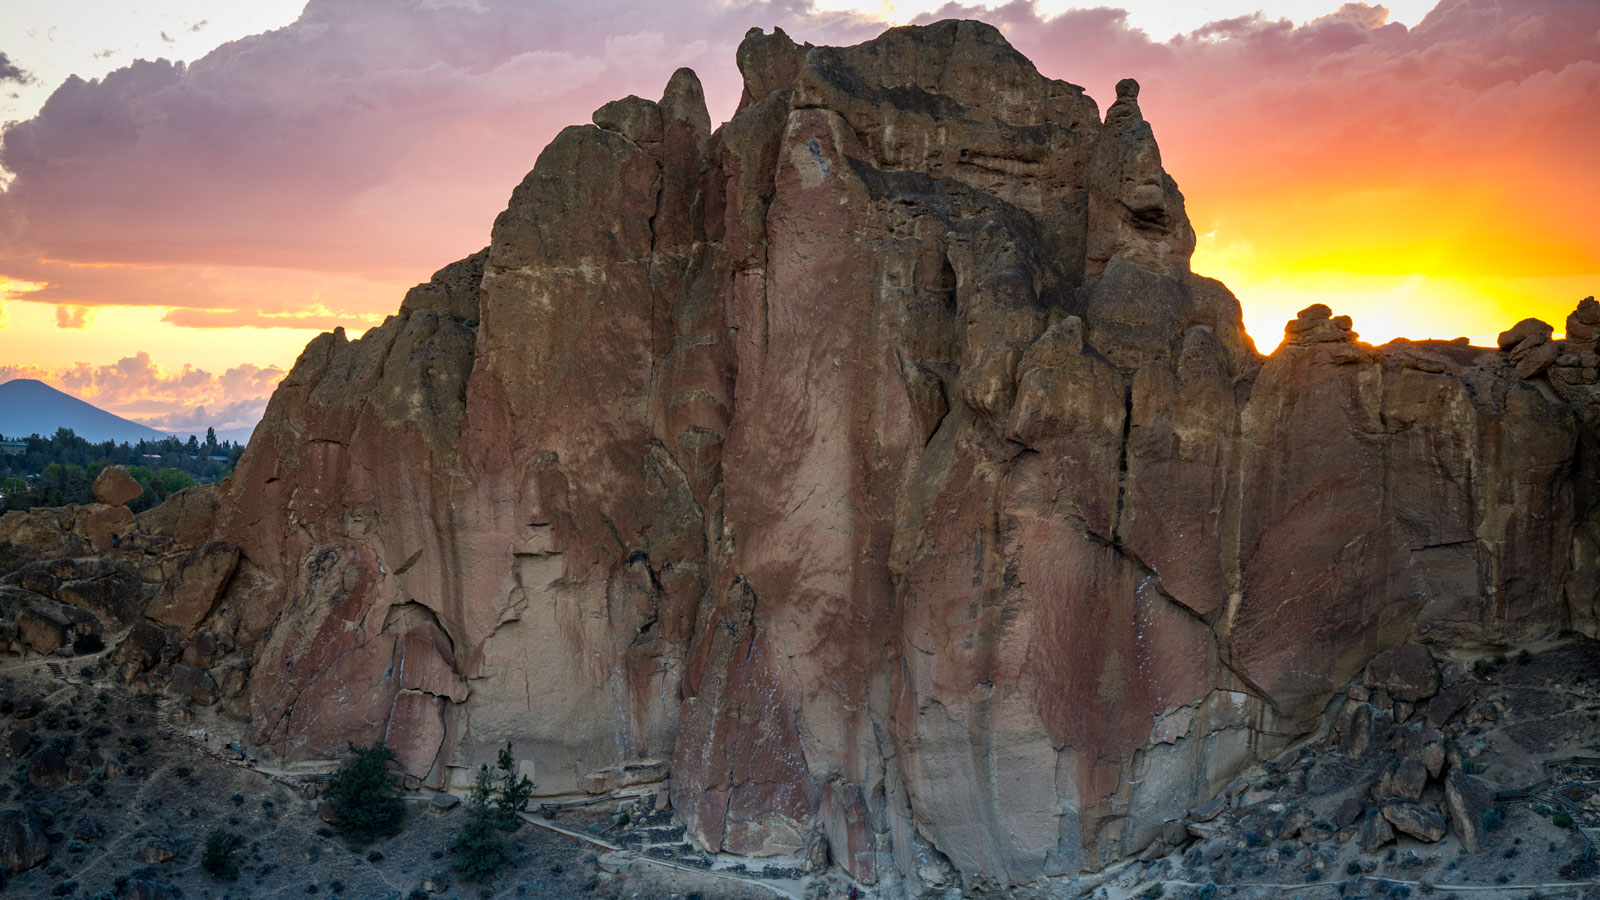 Image of Climbing Old Smith Rock